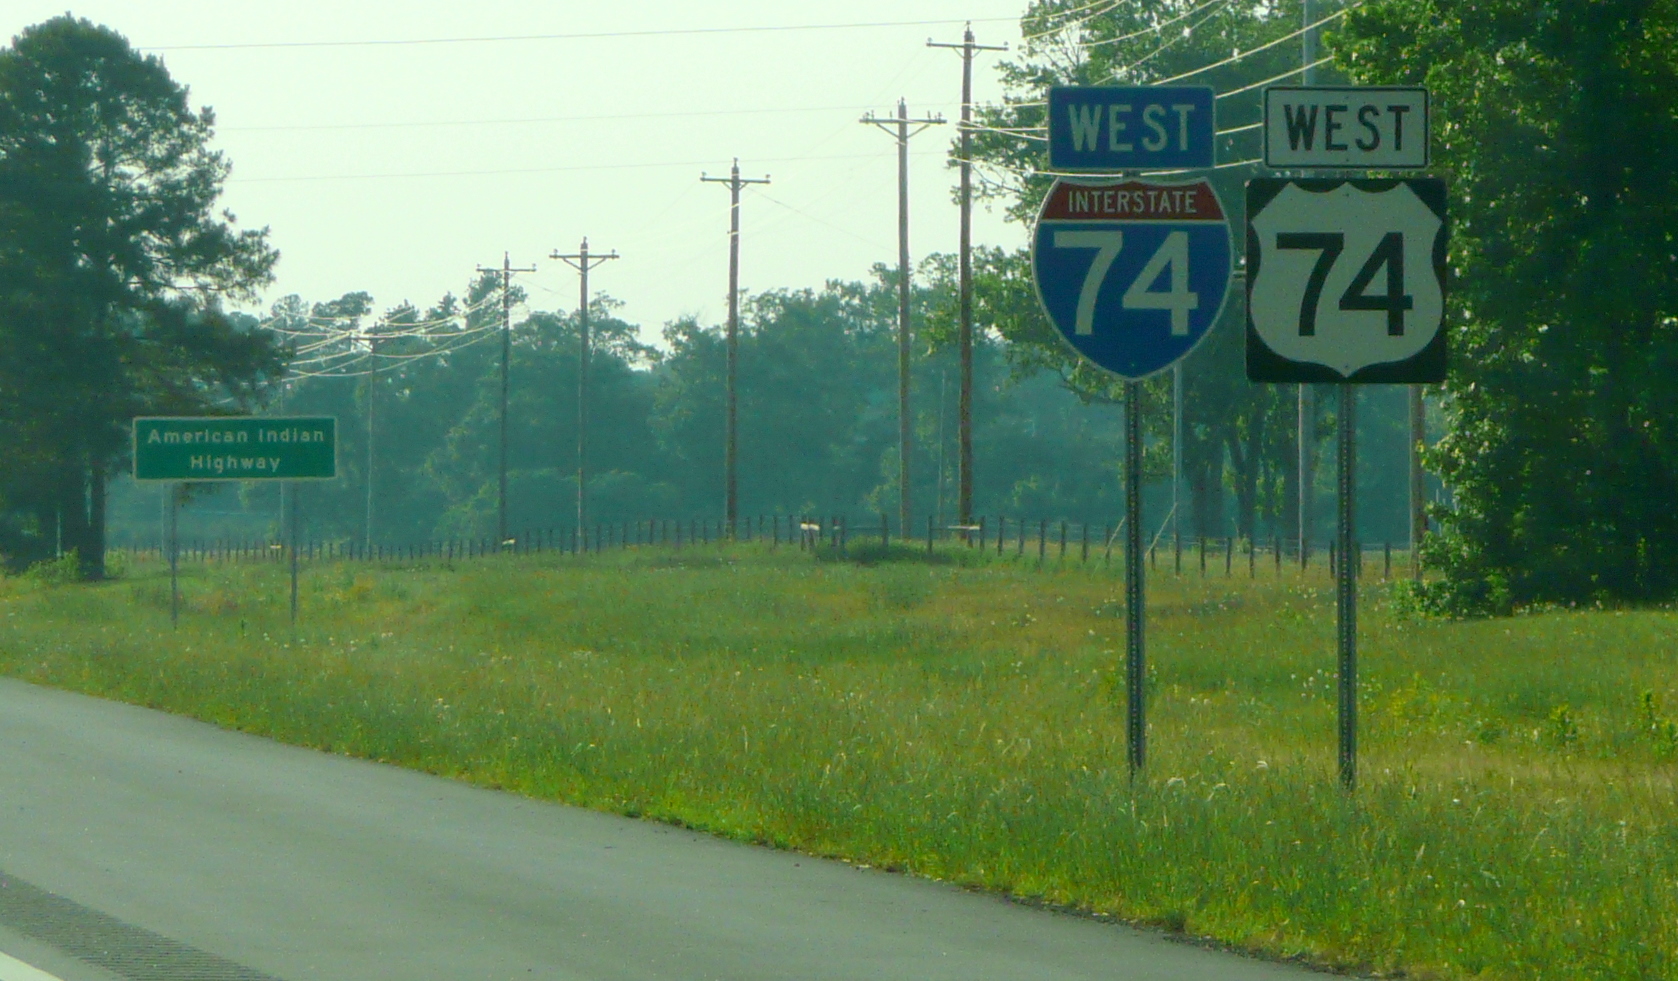 Photo of the first I-74/US 74 reassurance marker beyond the NC 41 exit near 
Lumberton in May 2009, courtesy of James Mast